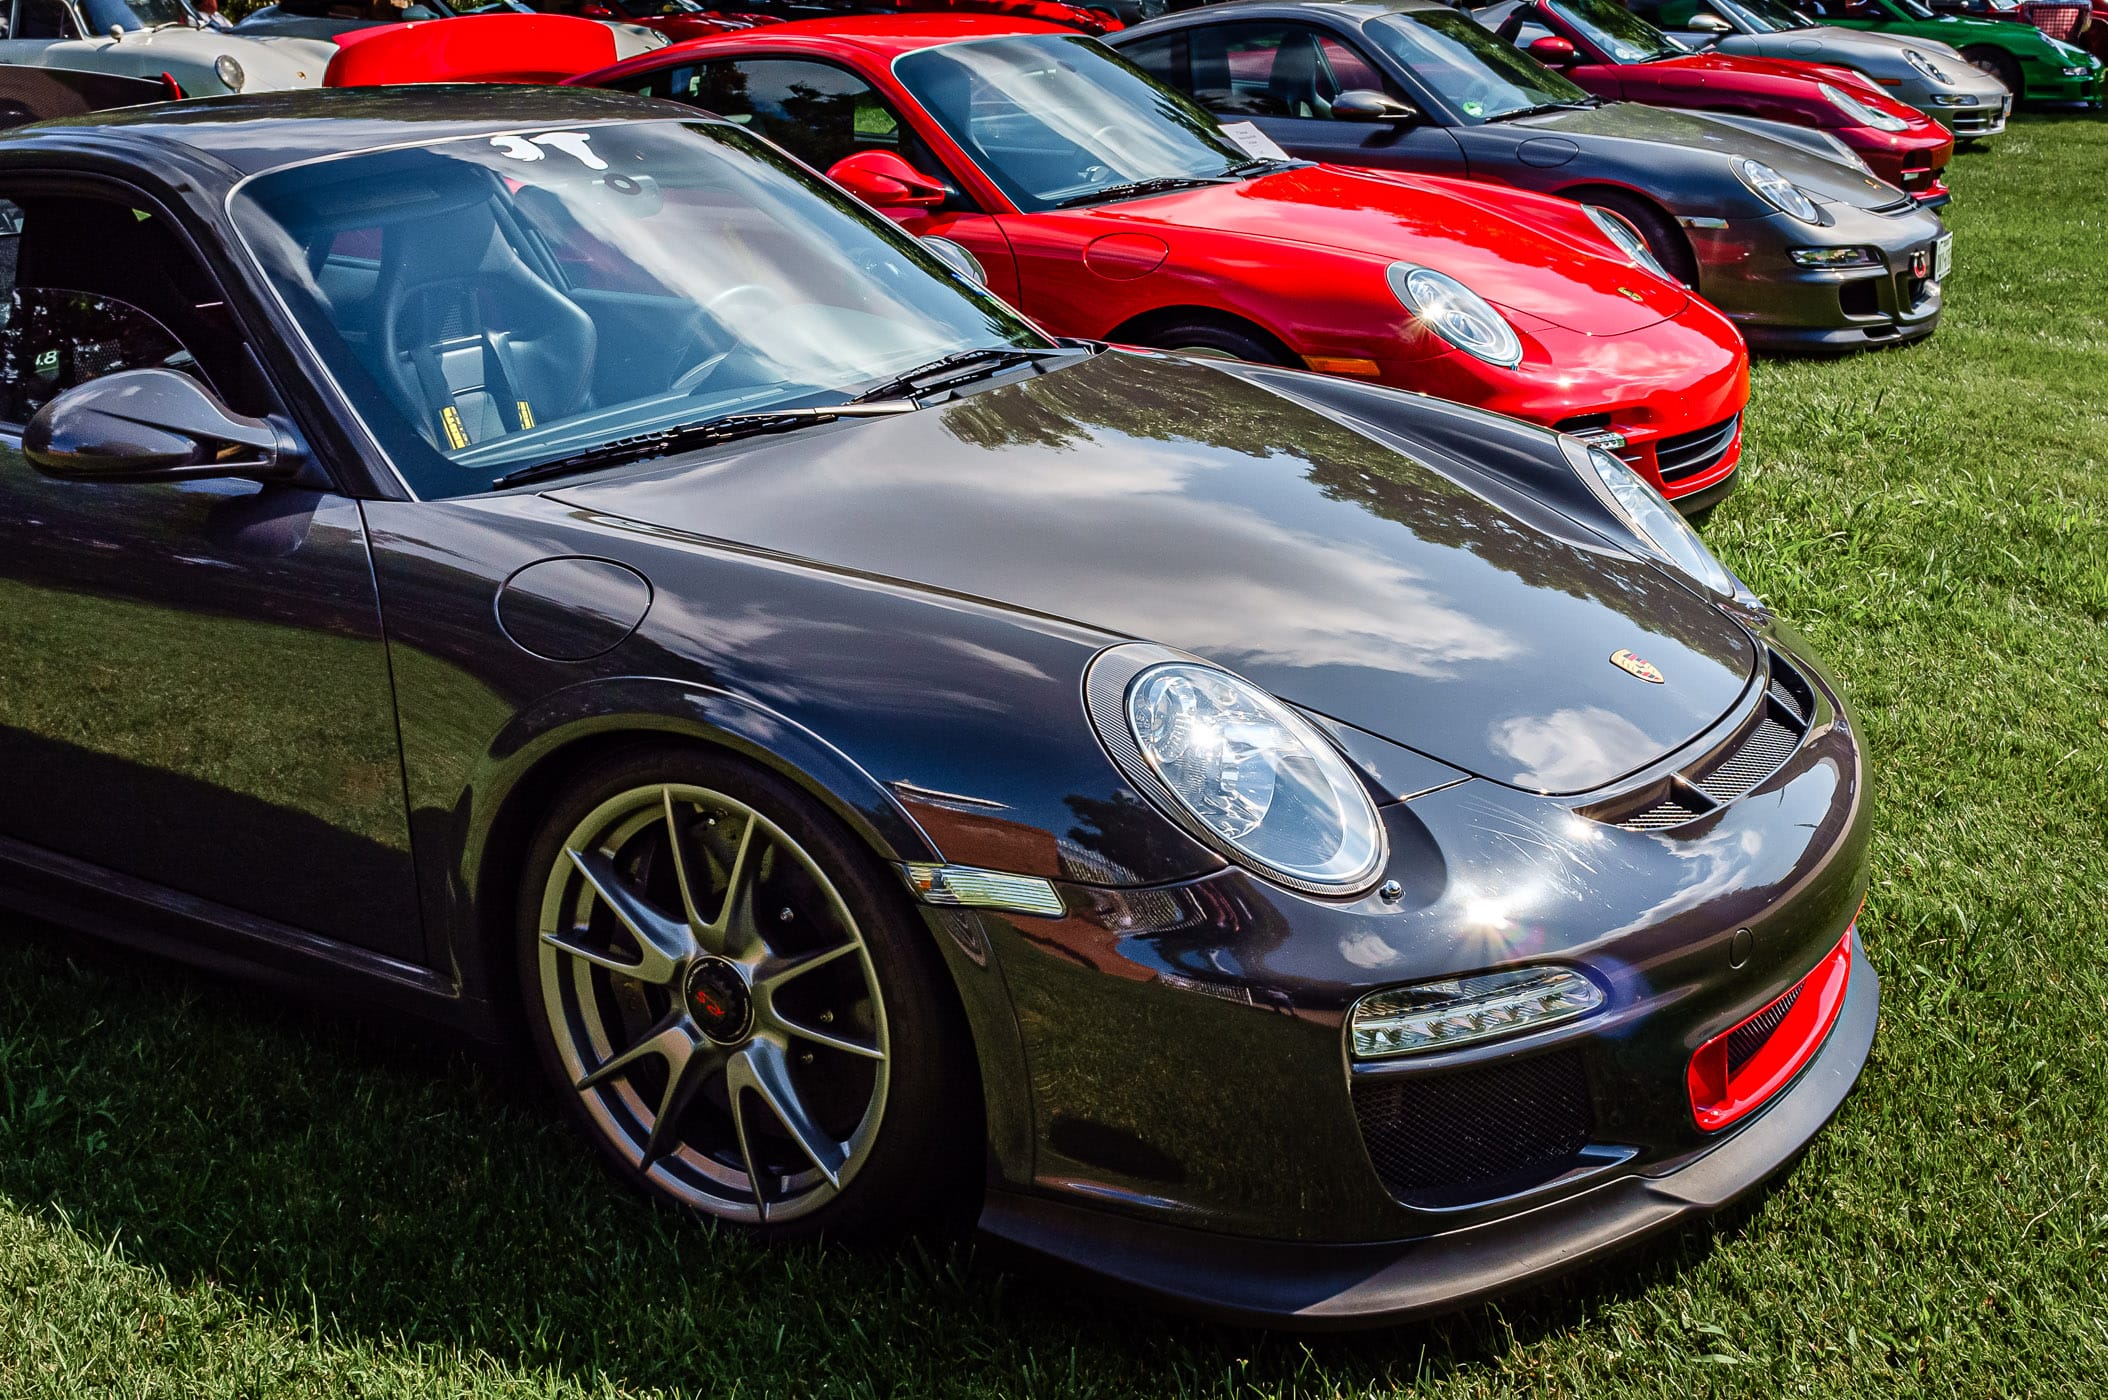 Several Porsche 911s (and related variants) at Dallas' Autos in the Park at Cooper Aerobics Center.